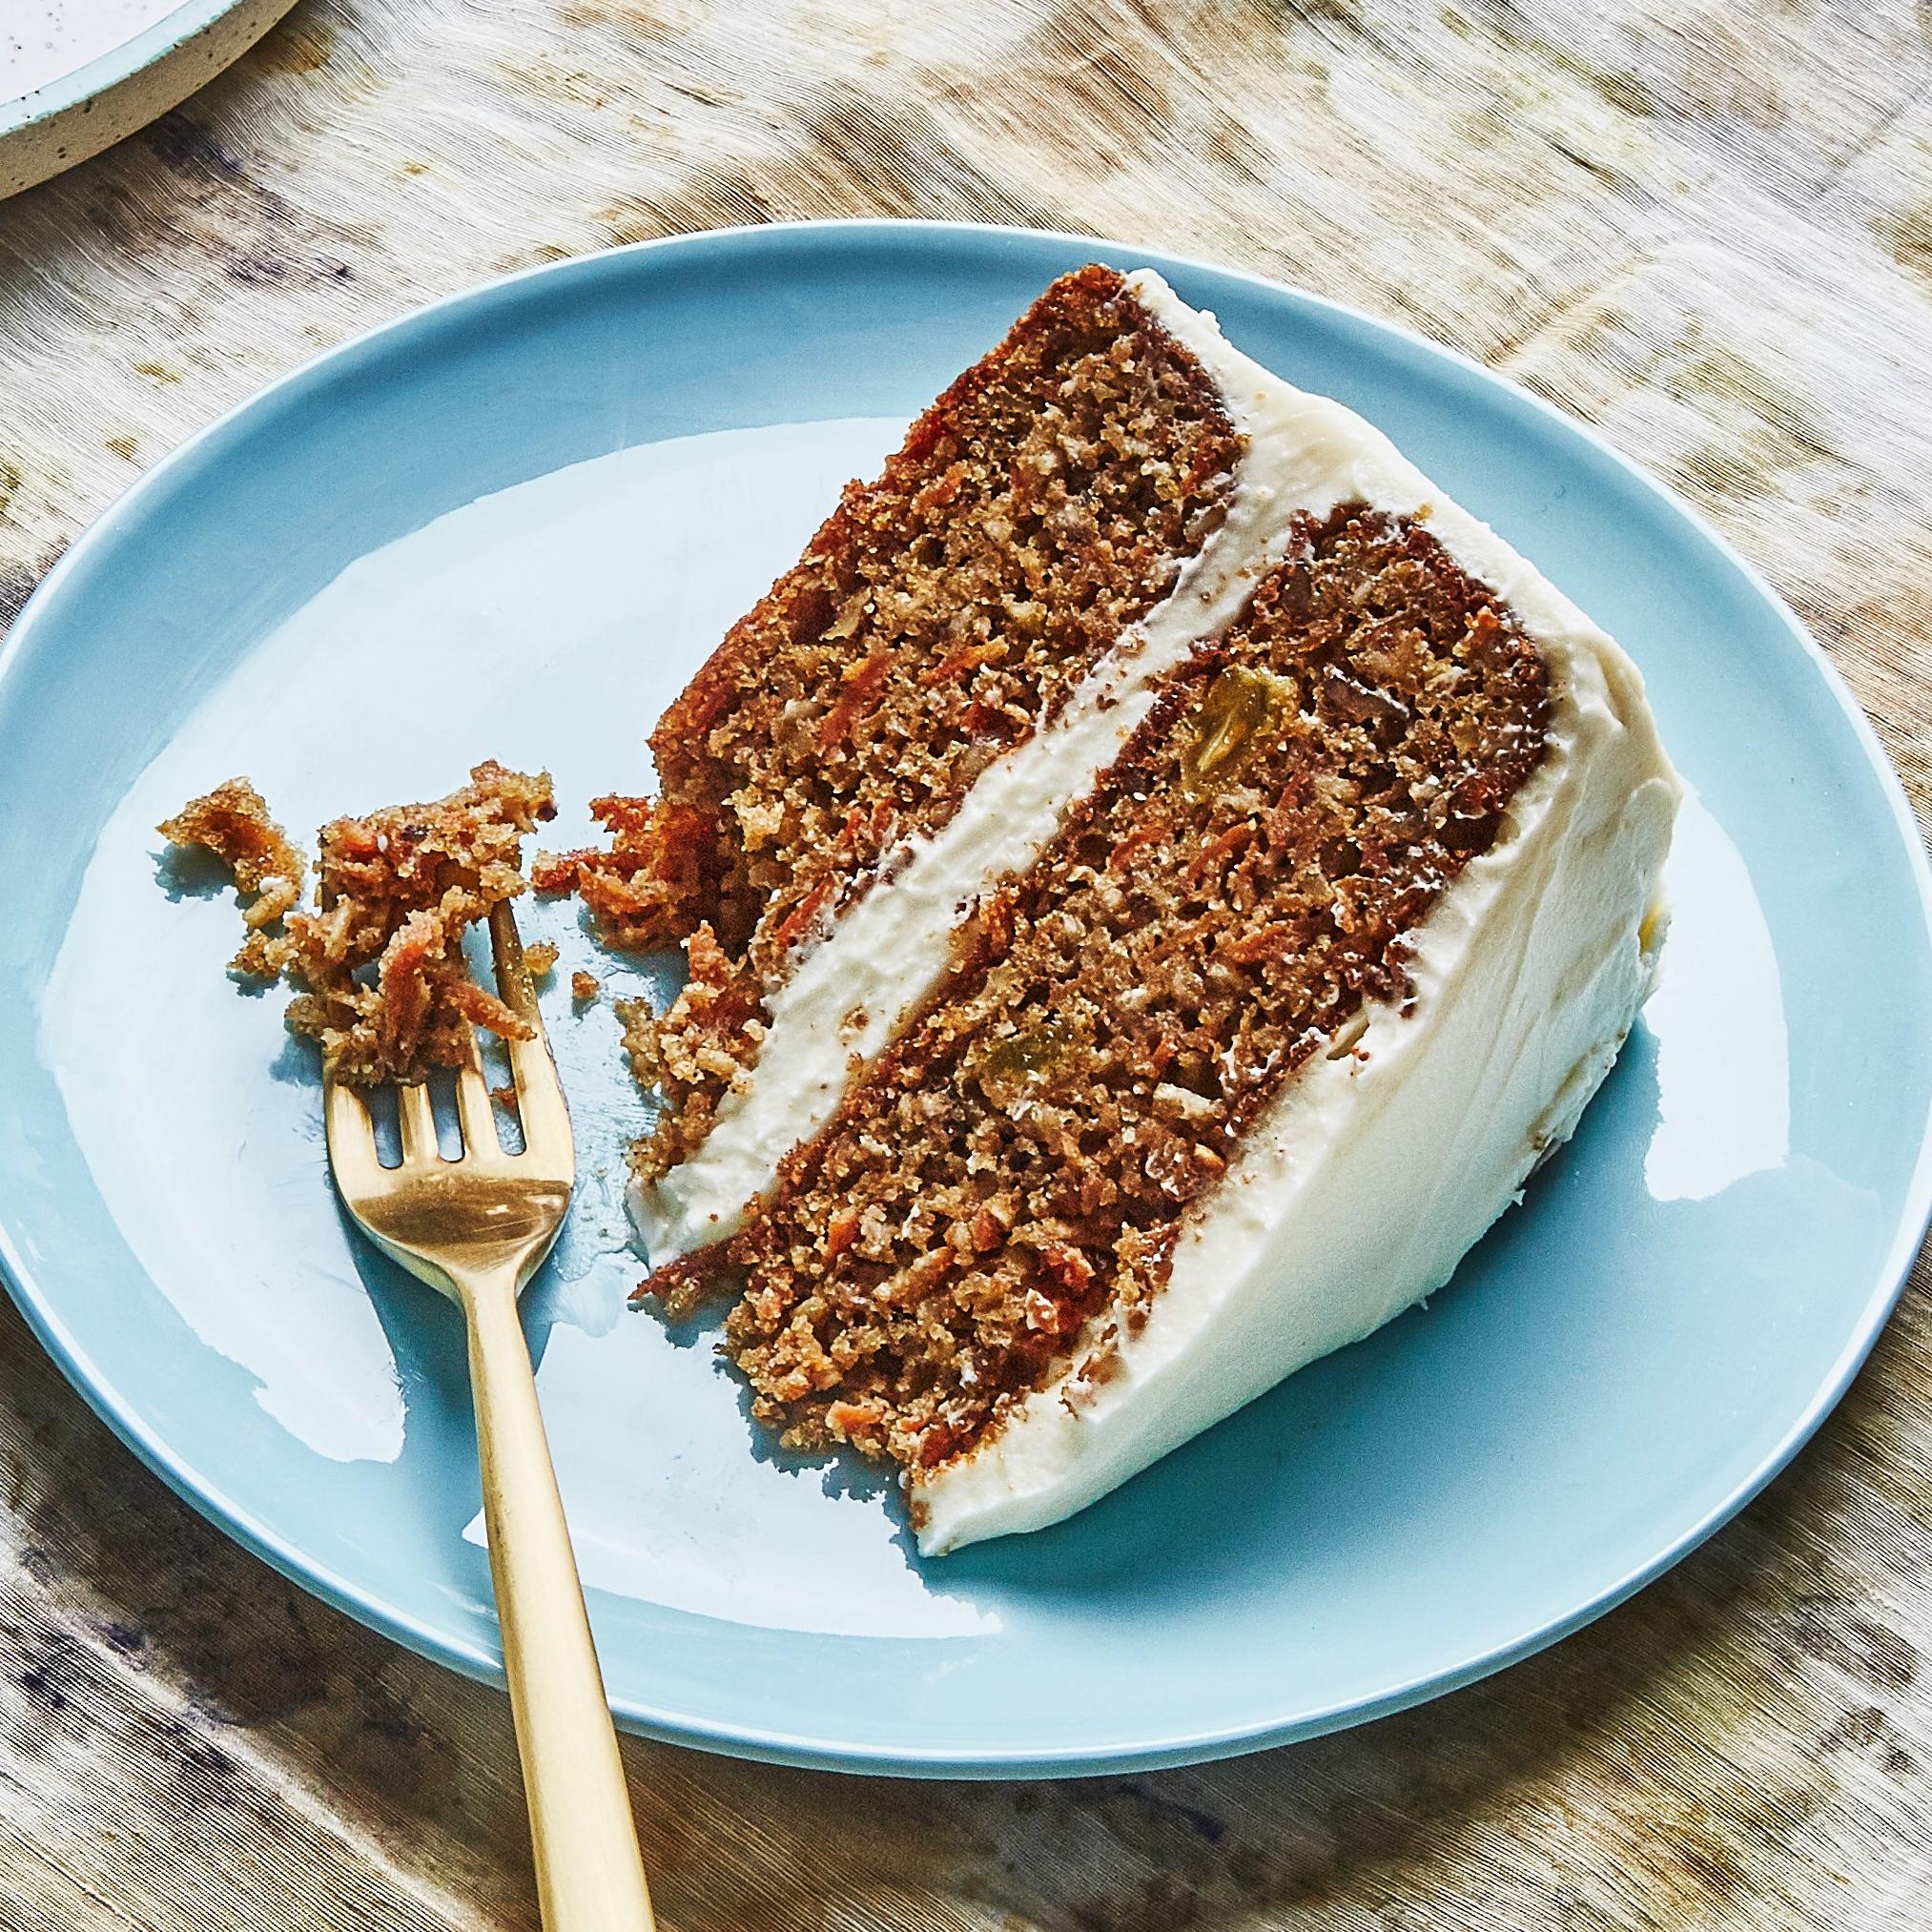  You'll swear this carrot cake is straight from Grandma's kitchen!